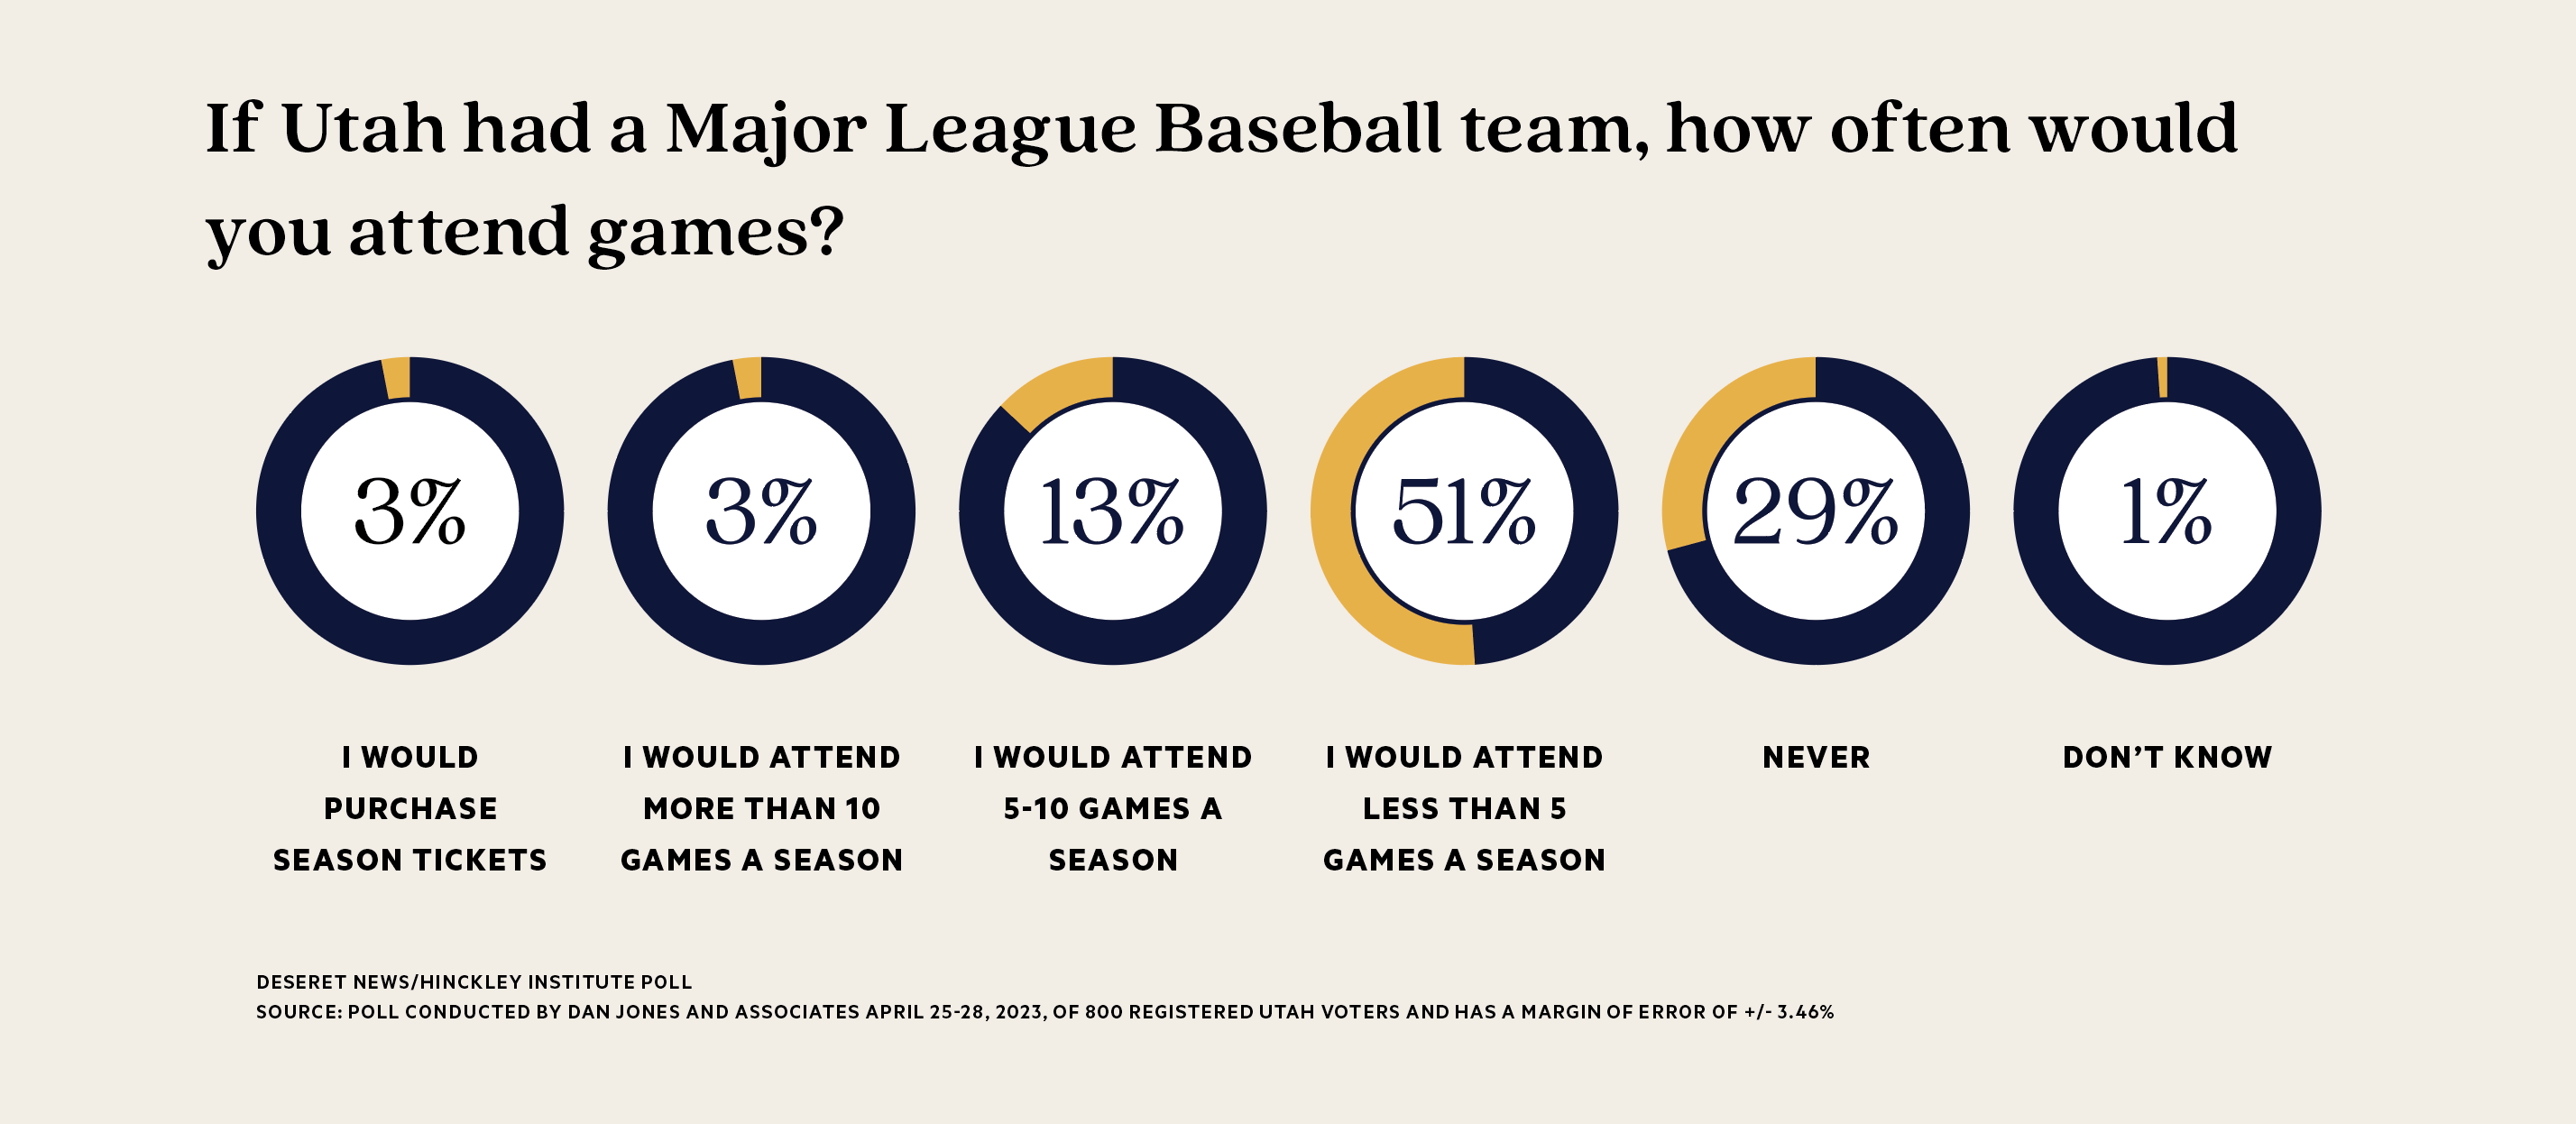 An investment in an MLB franchise would be an investment in Utah’s future, with a majority of Utahns supporting the effort.